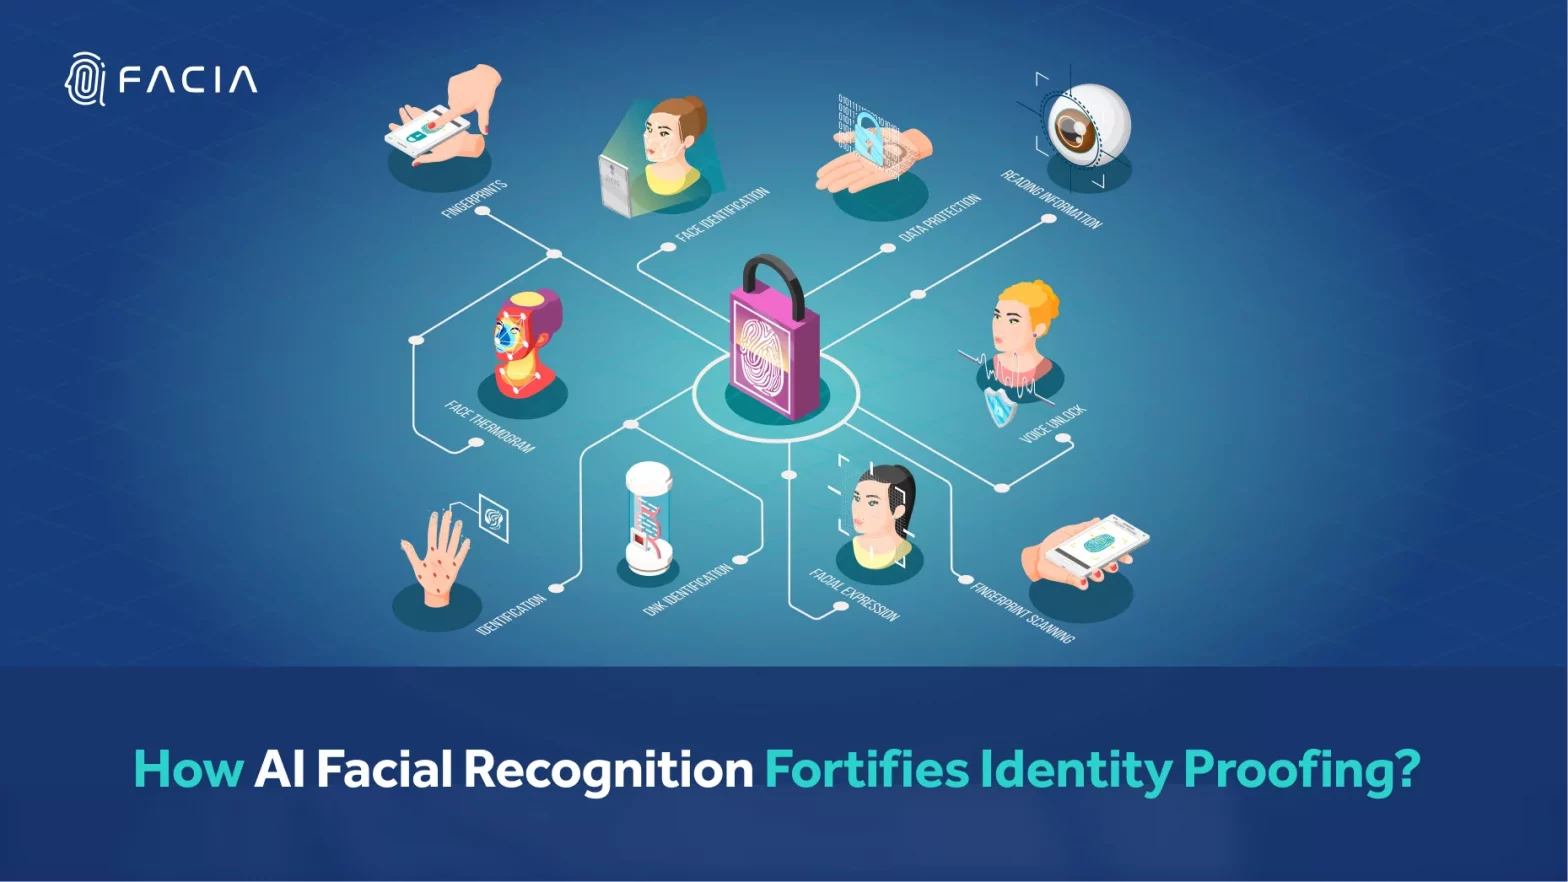 How AI Facial Recognition Fortifies Identity Proofing